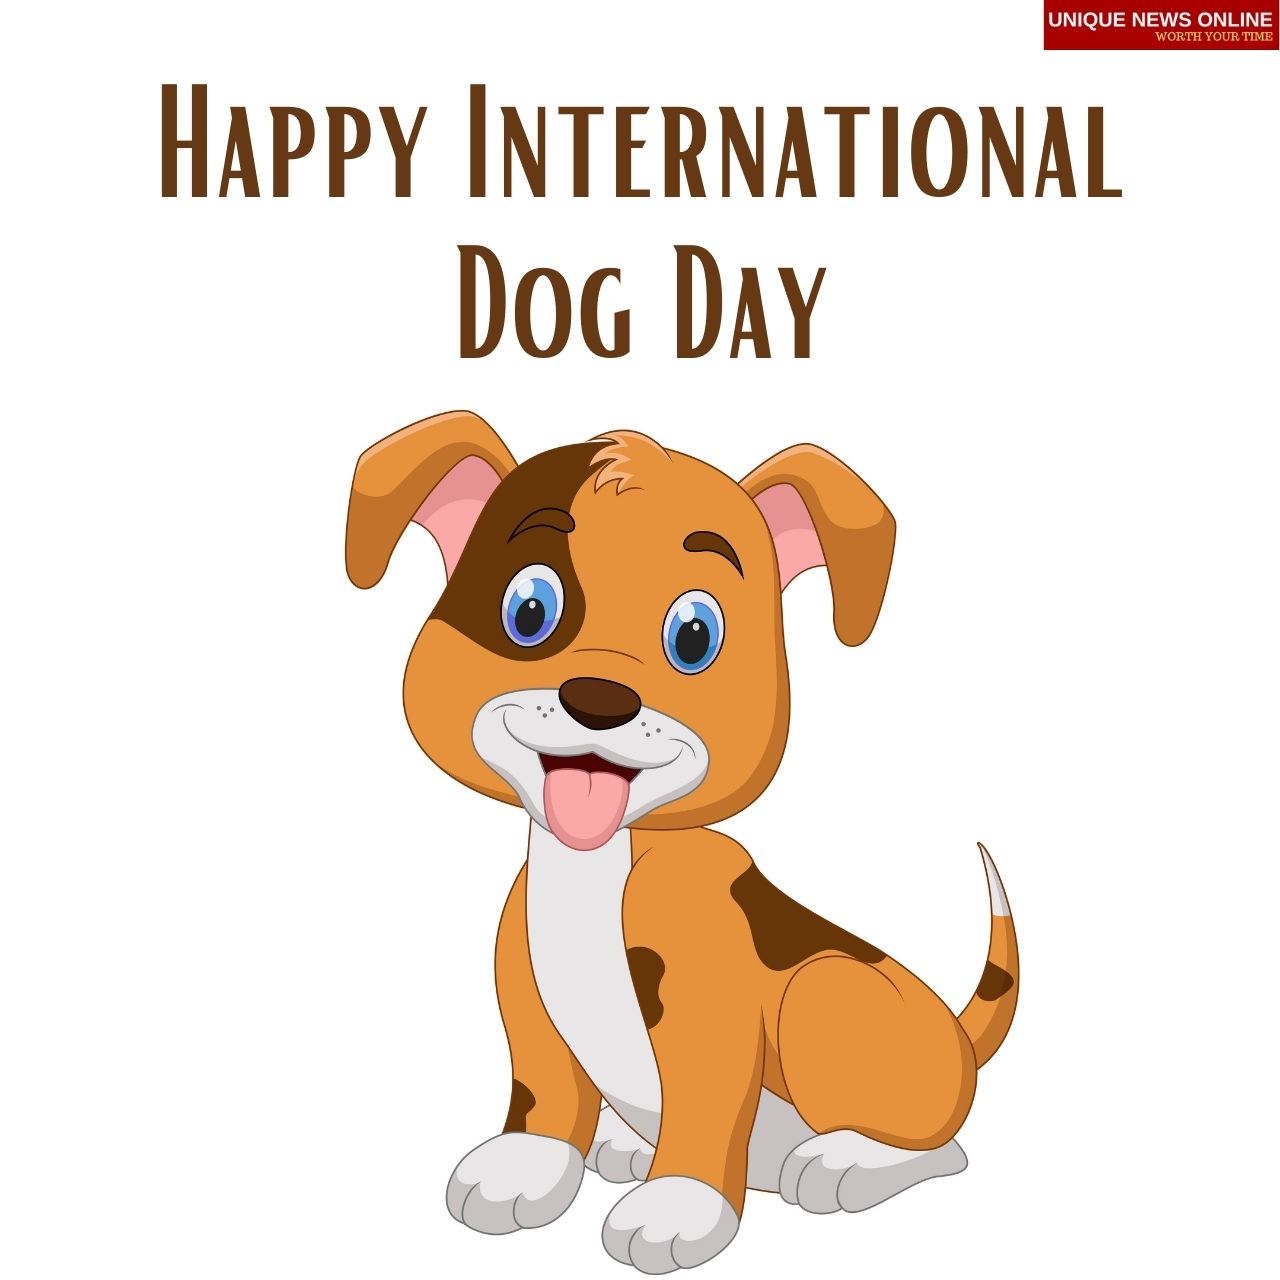 Happy International Dog Day 2021 Quotes, Images, Instagram Captions, Wishes, Messages, and Best Meme